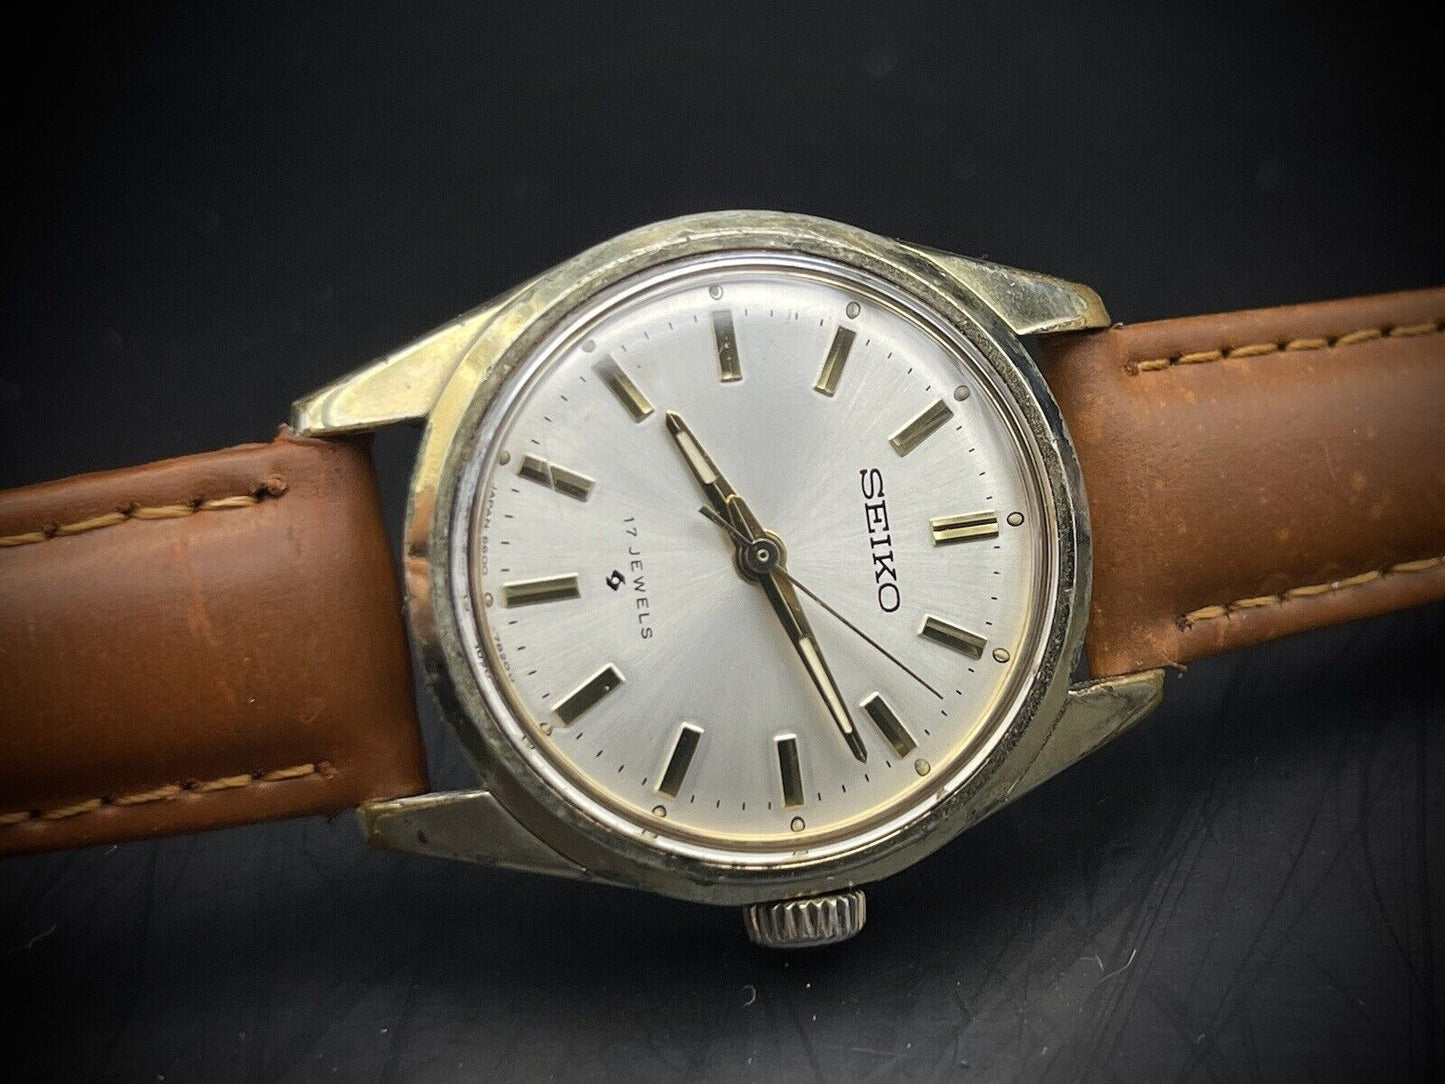 Vintage Seiko Manual Wind 30mm 66-7970 Unisex Watch, Japan Made - Grab A Watch Co